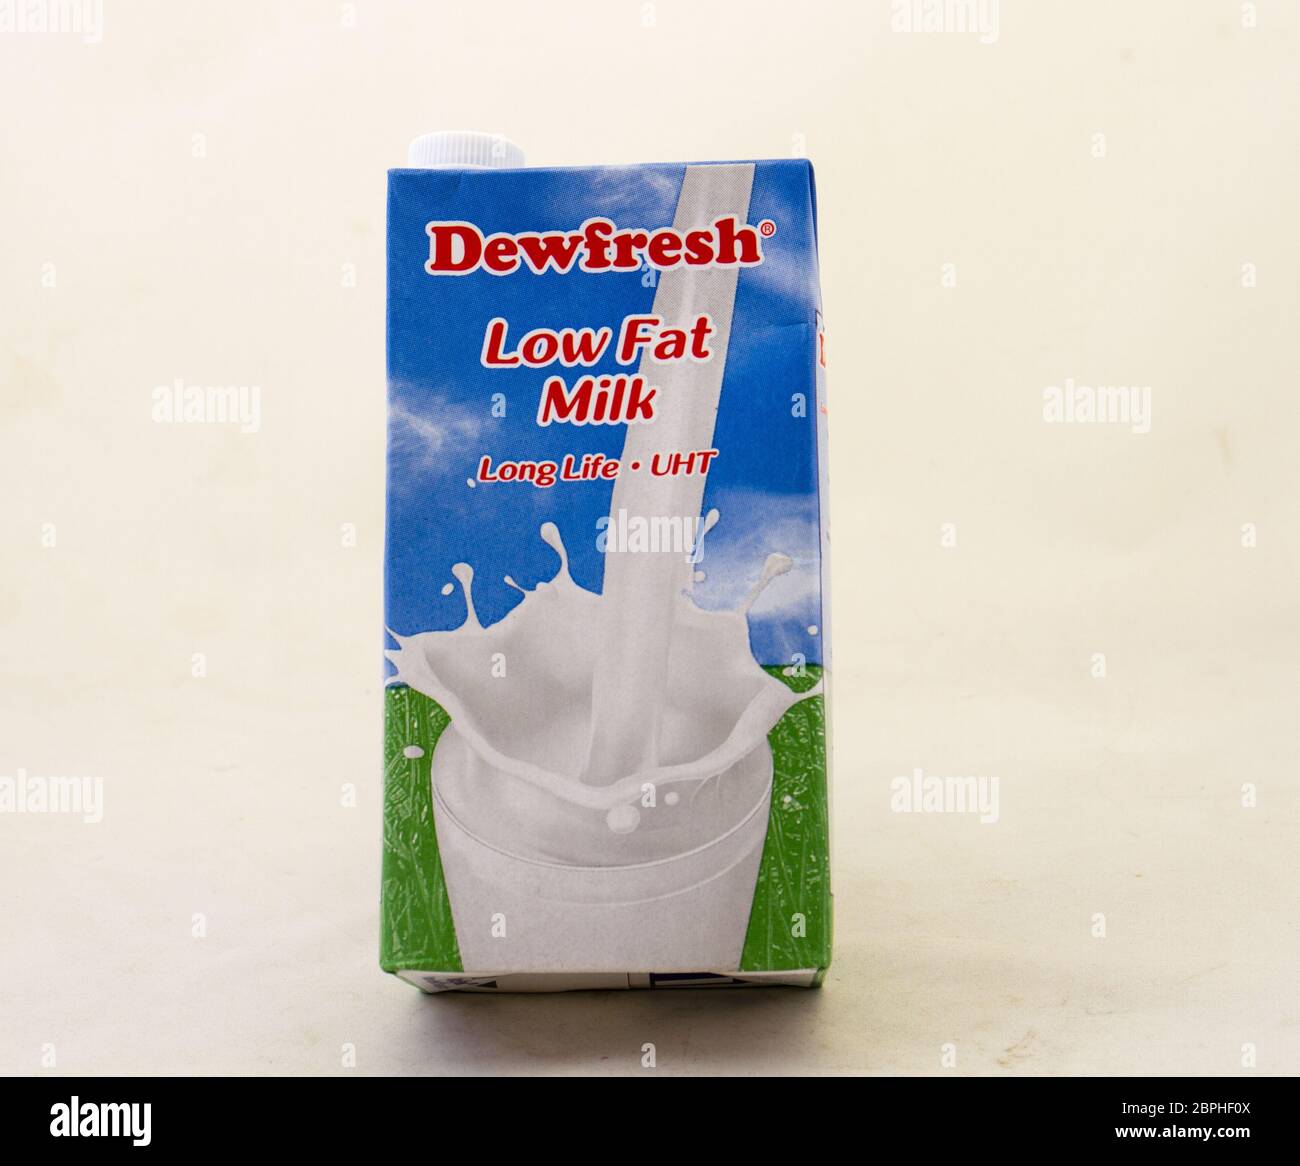 https://c8.alamy.com/comp/2BPHF0X/alberton-south-africa-a-box-of-dewfresh-low-fat-longlife-milk-isolated-on-a-clear-background-image-with-copy-space-2BPHF0X.jpg